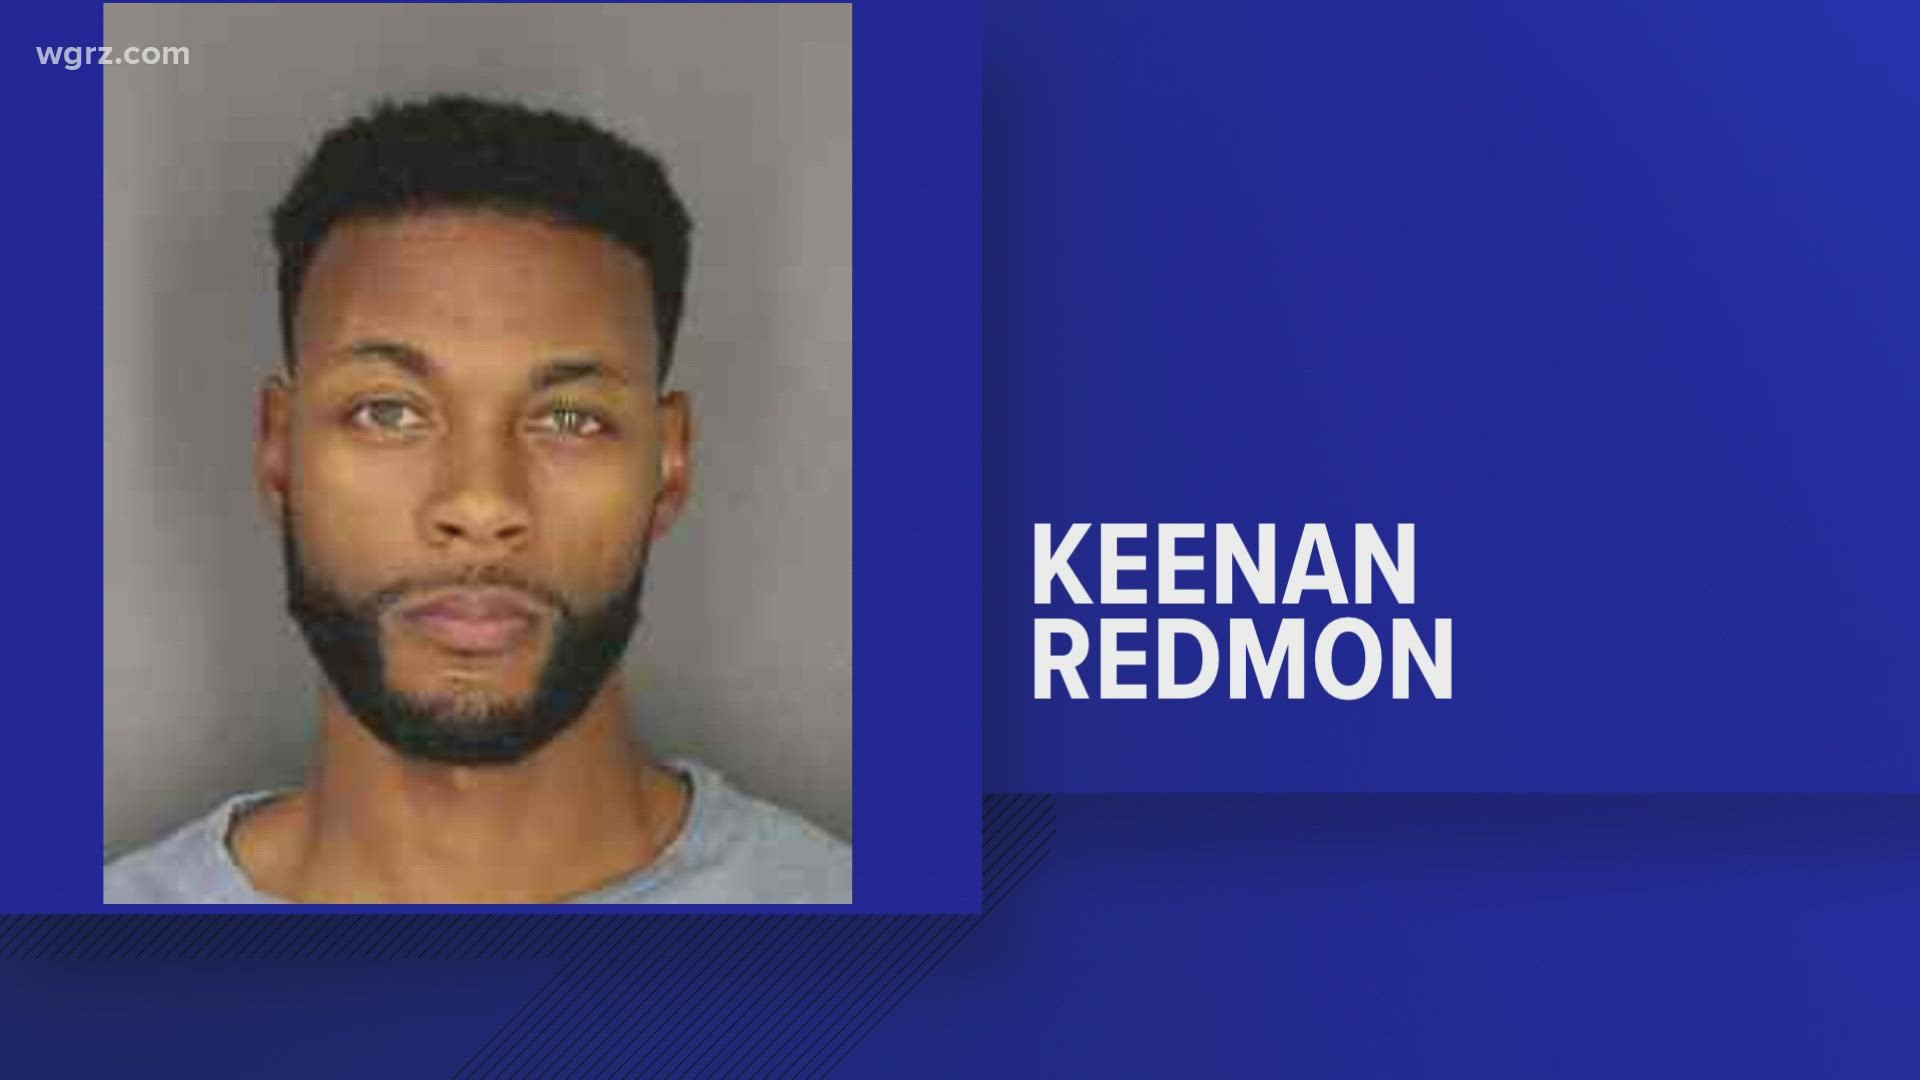 36-year-old Keenan Redmon pleaded guilty to menacing and criminal trespass for attacking a woman in a Hertel Avenue restaurant last summer